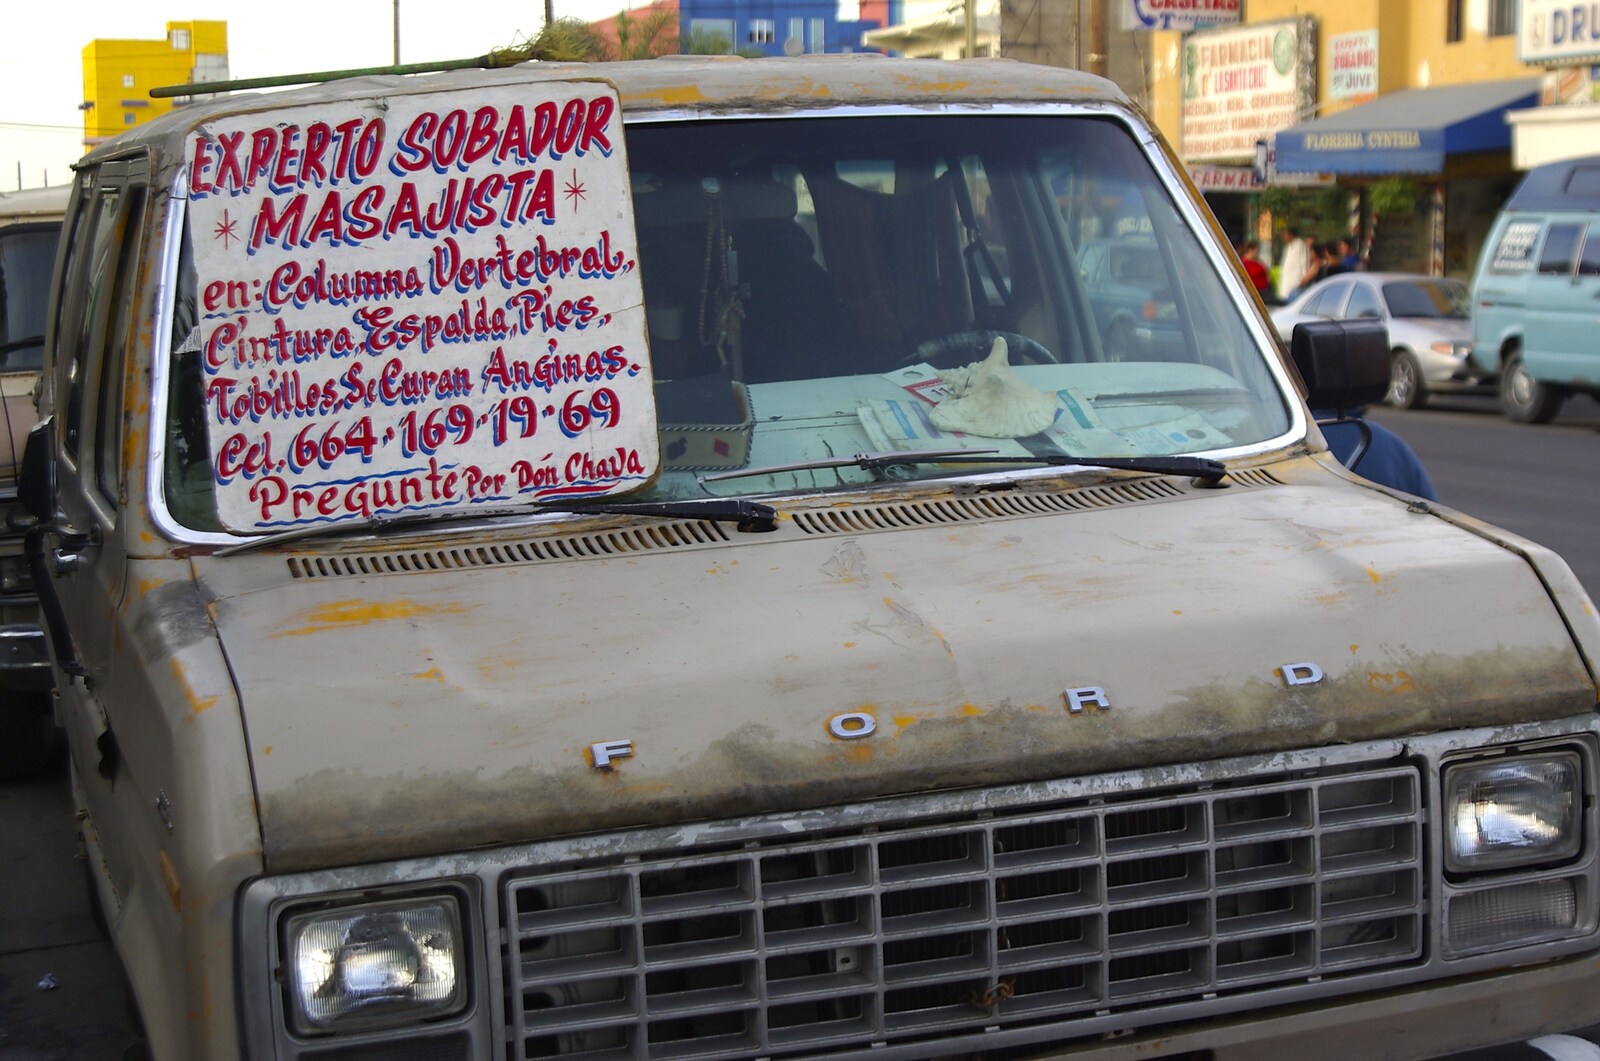 Rosarito and Tijuana, Baja California, Mexico - 2nd March 2008: A beat-up Ford van displays some sort of advert